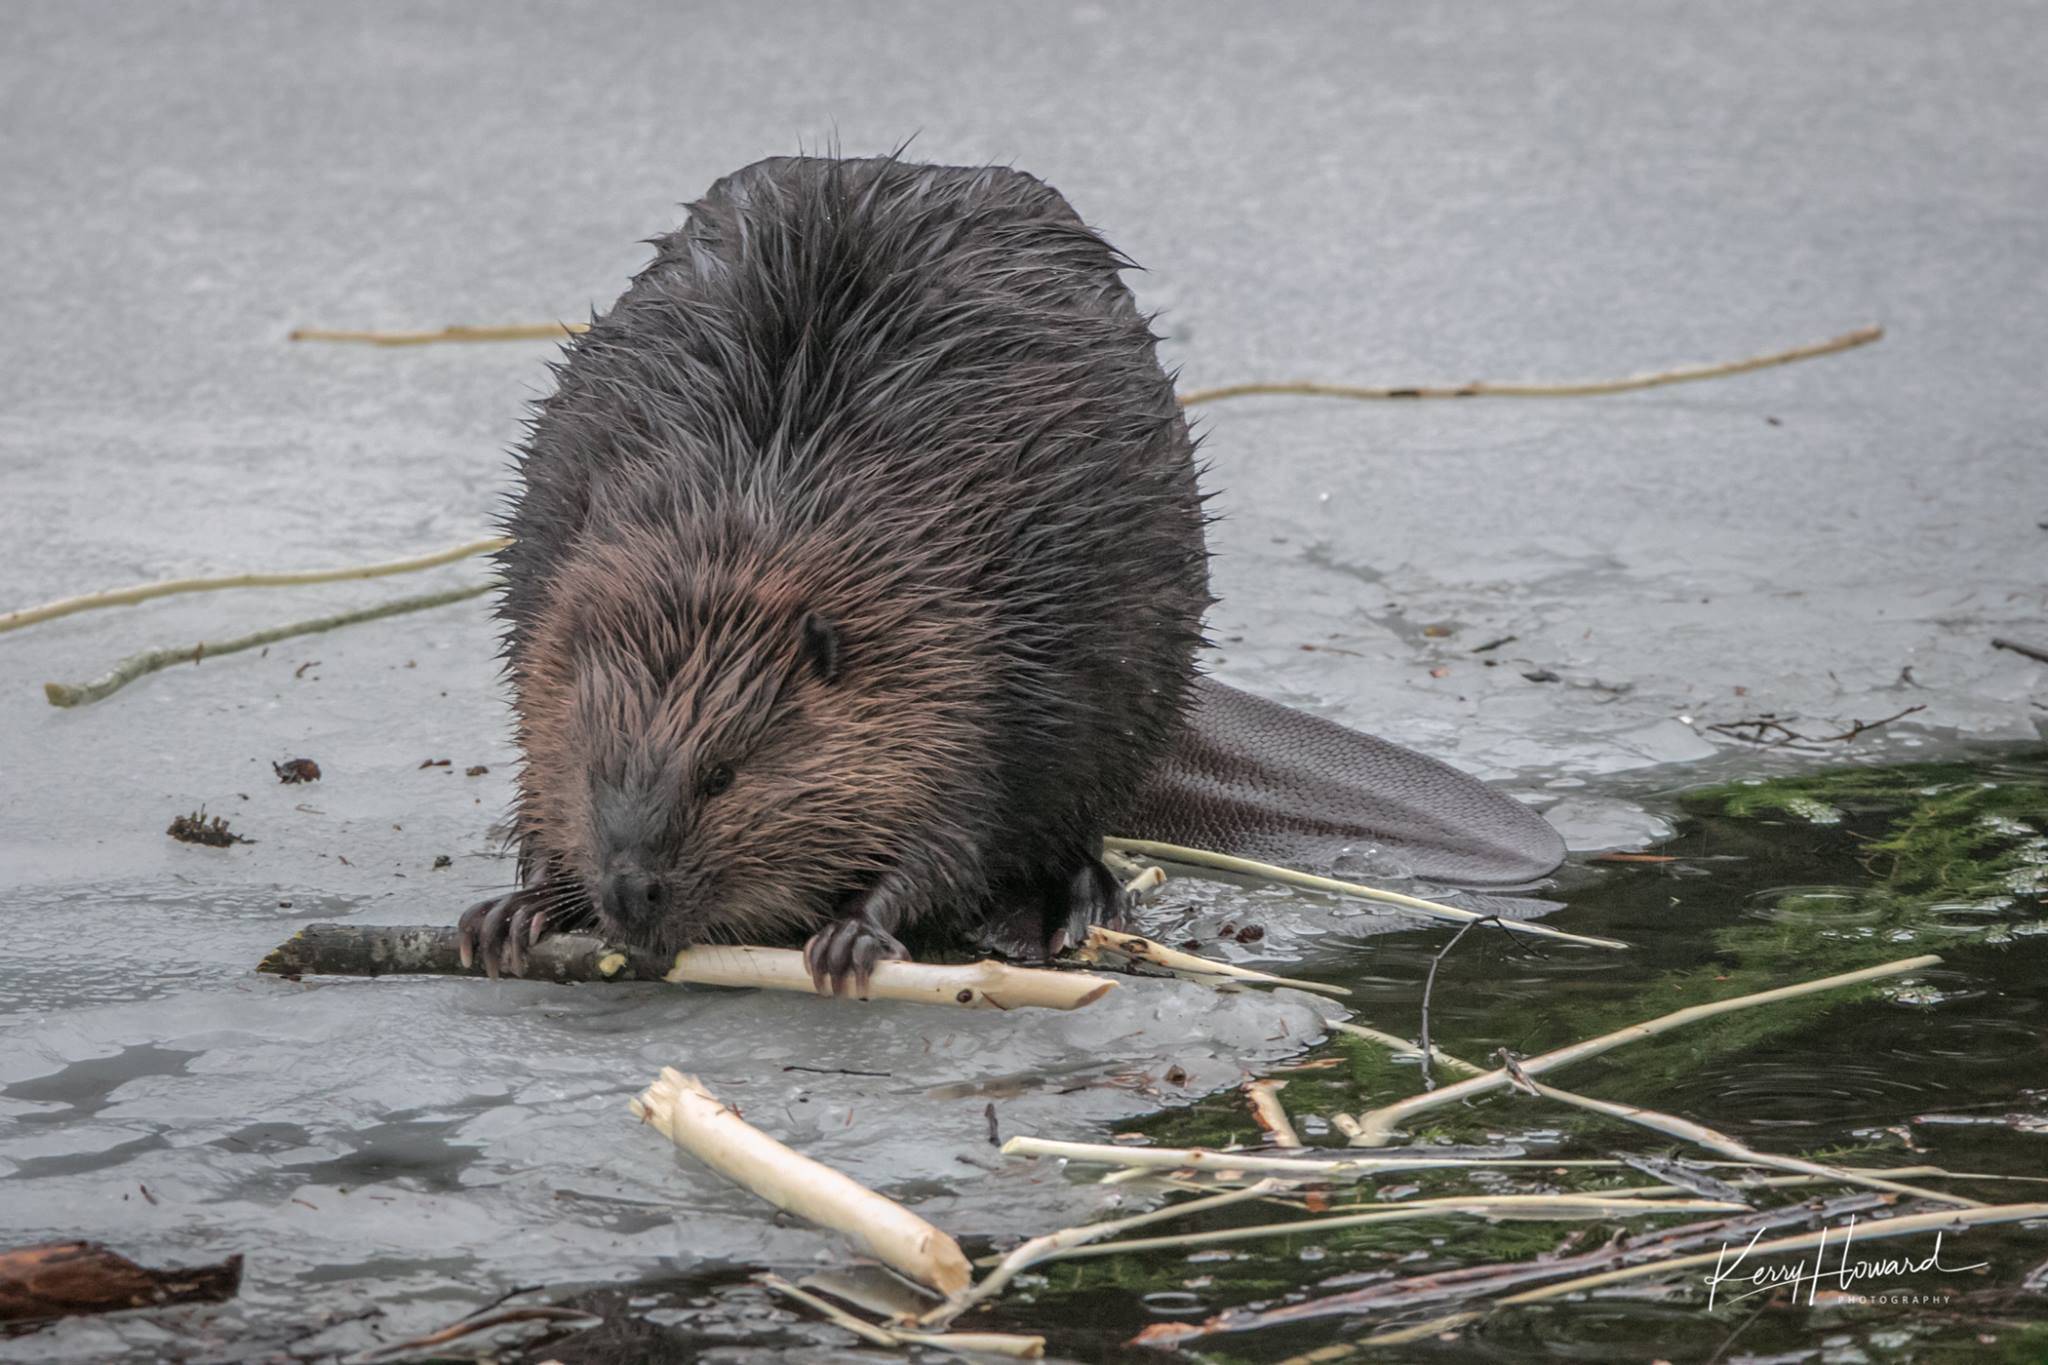 A beaver came out of its winter rest in the lodge to have lunch on the ice. (Photo by Kerry Howard)